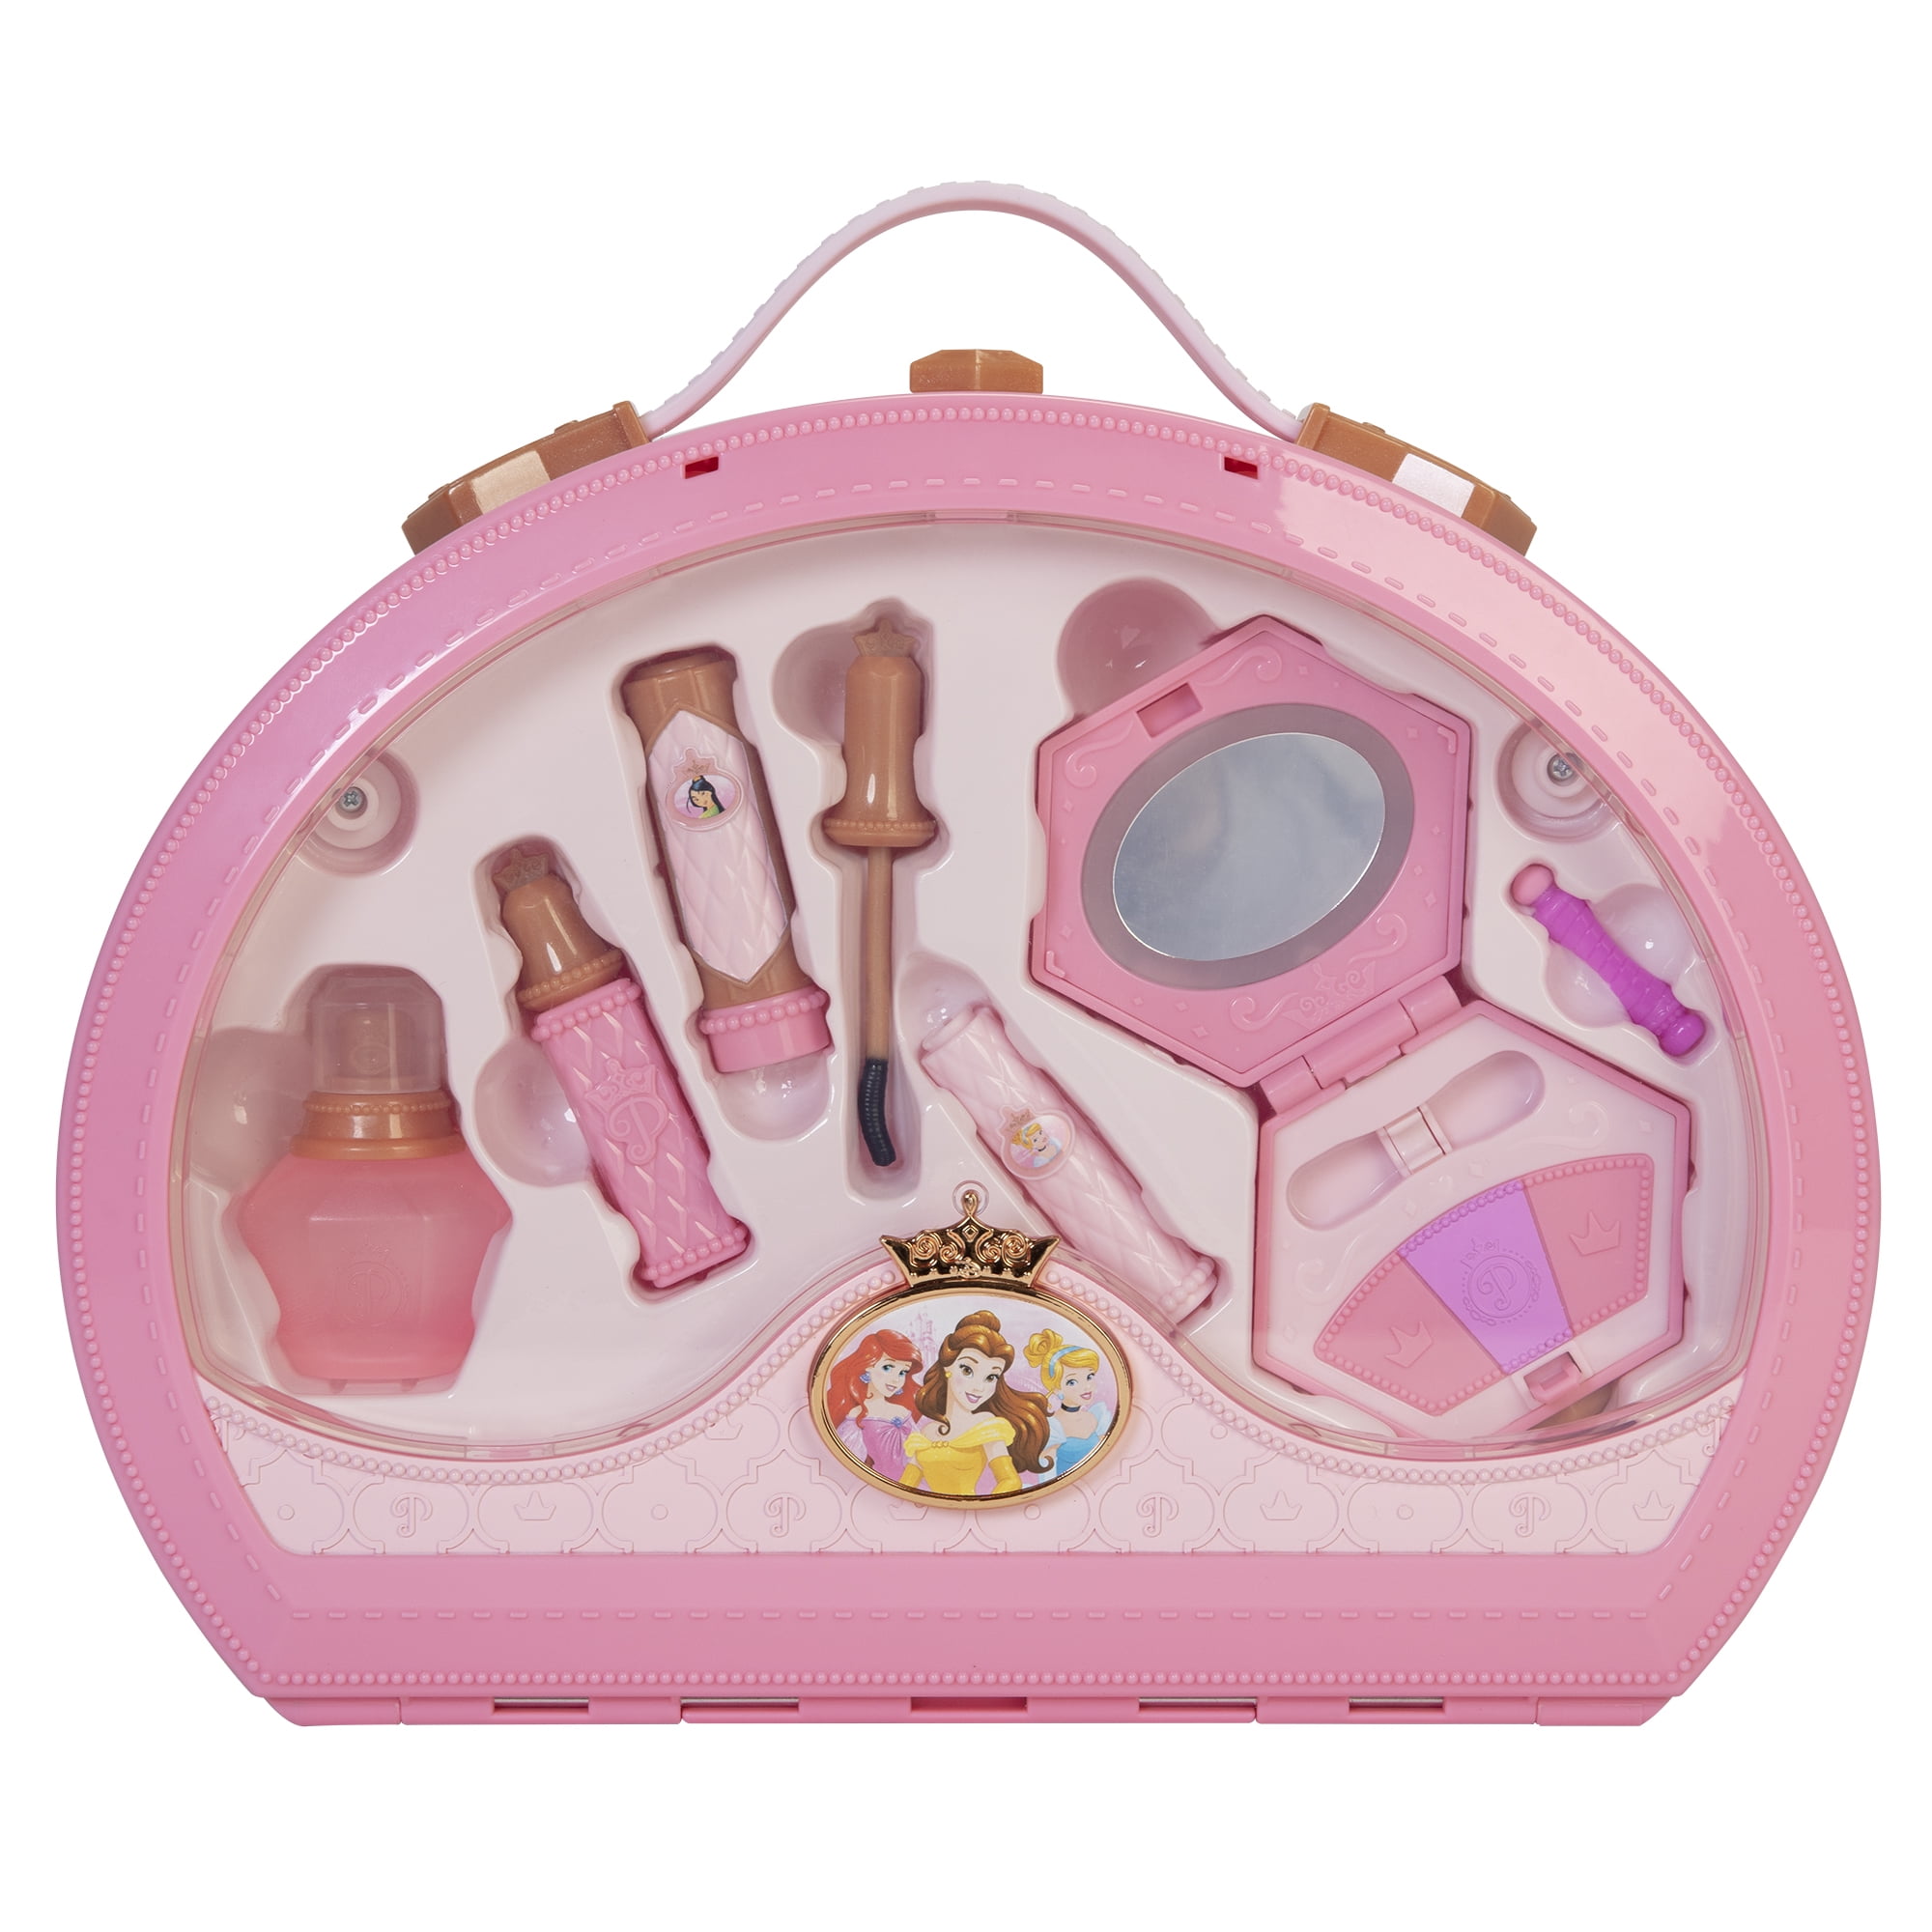 Details about   Disney Princess Style Collection Wristlet Pink Pochette with Toy Smartphone New 